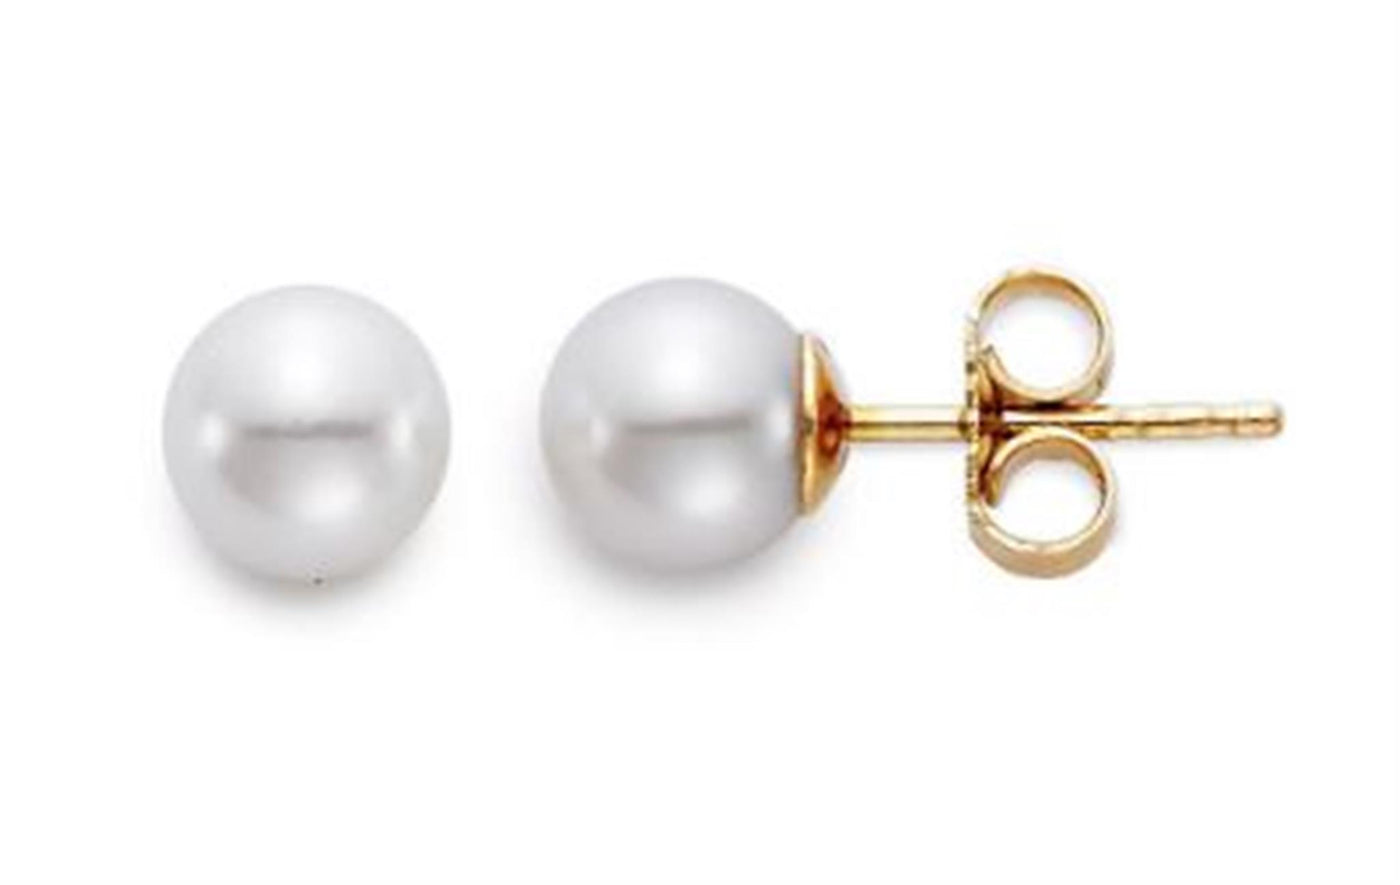 14K Yellow Gold Stud Style Earrings Featuring White Akoya Cultured Pearls